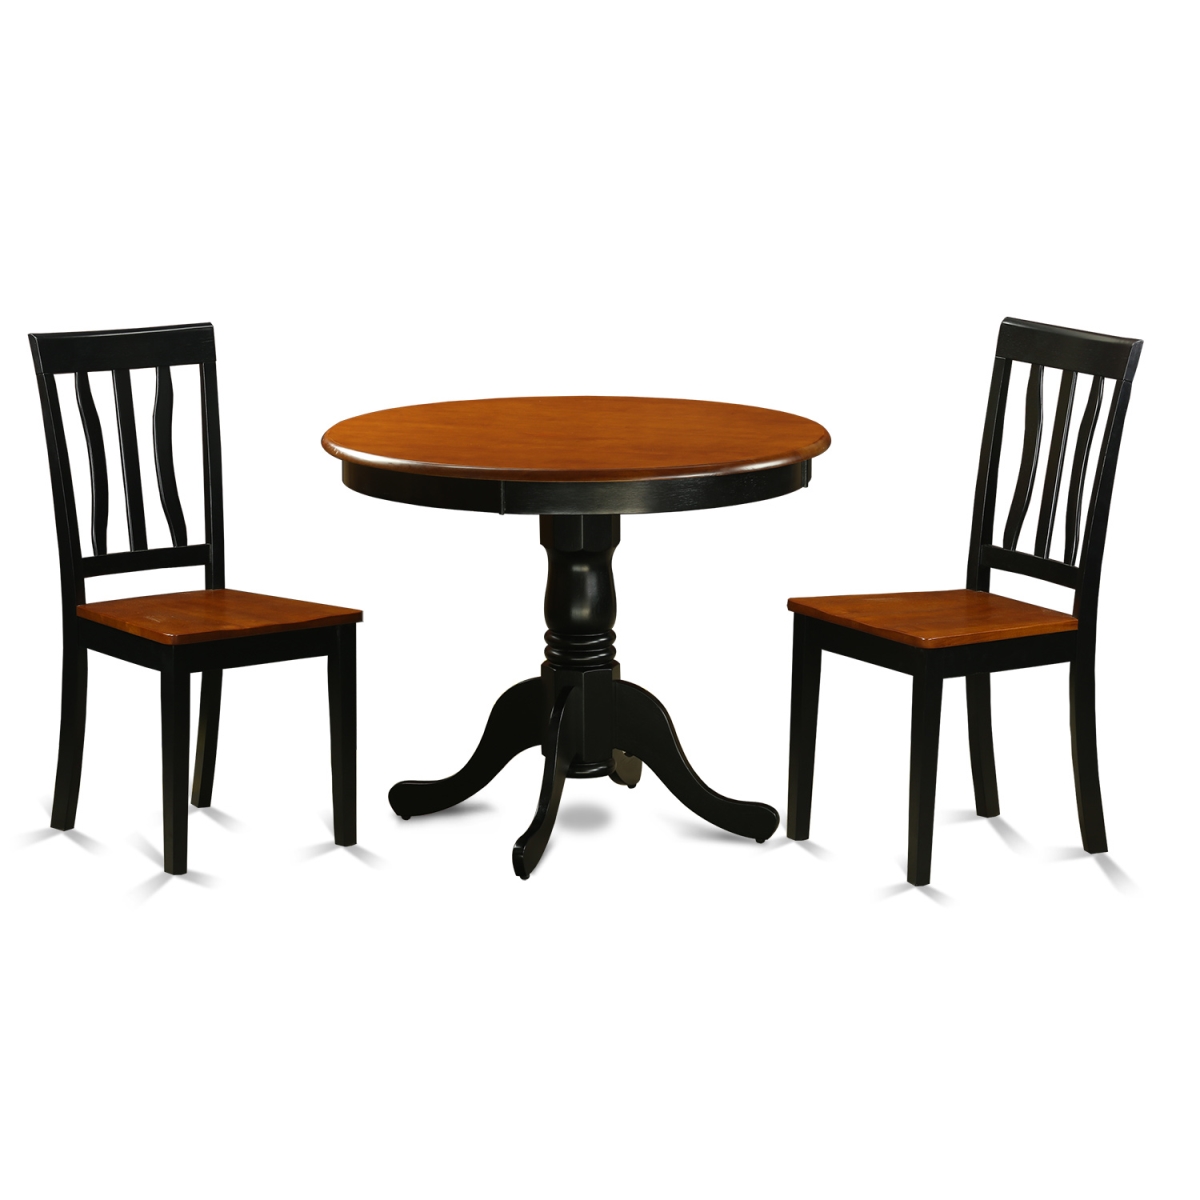 Picture of East West Furniture ANTI3-BLK-W Wood Seat Dining Set with 2 Solid Chairs, Black & Cherry - 3 Piece